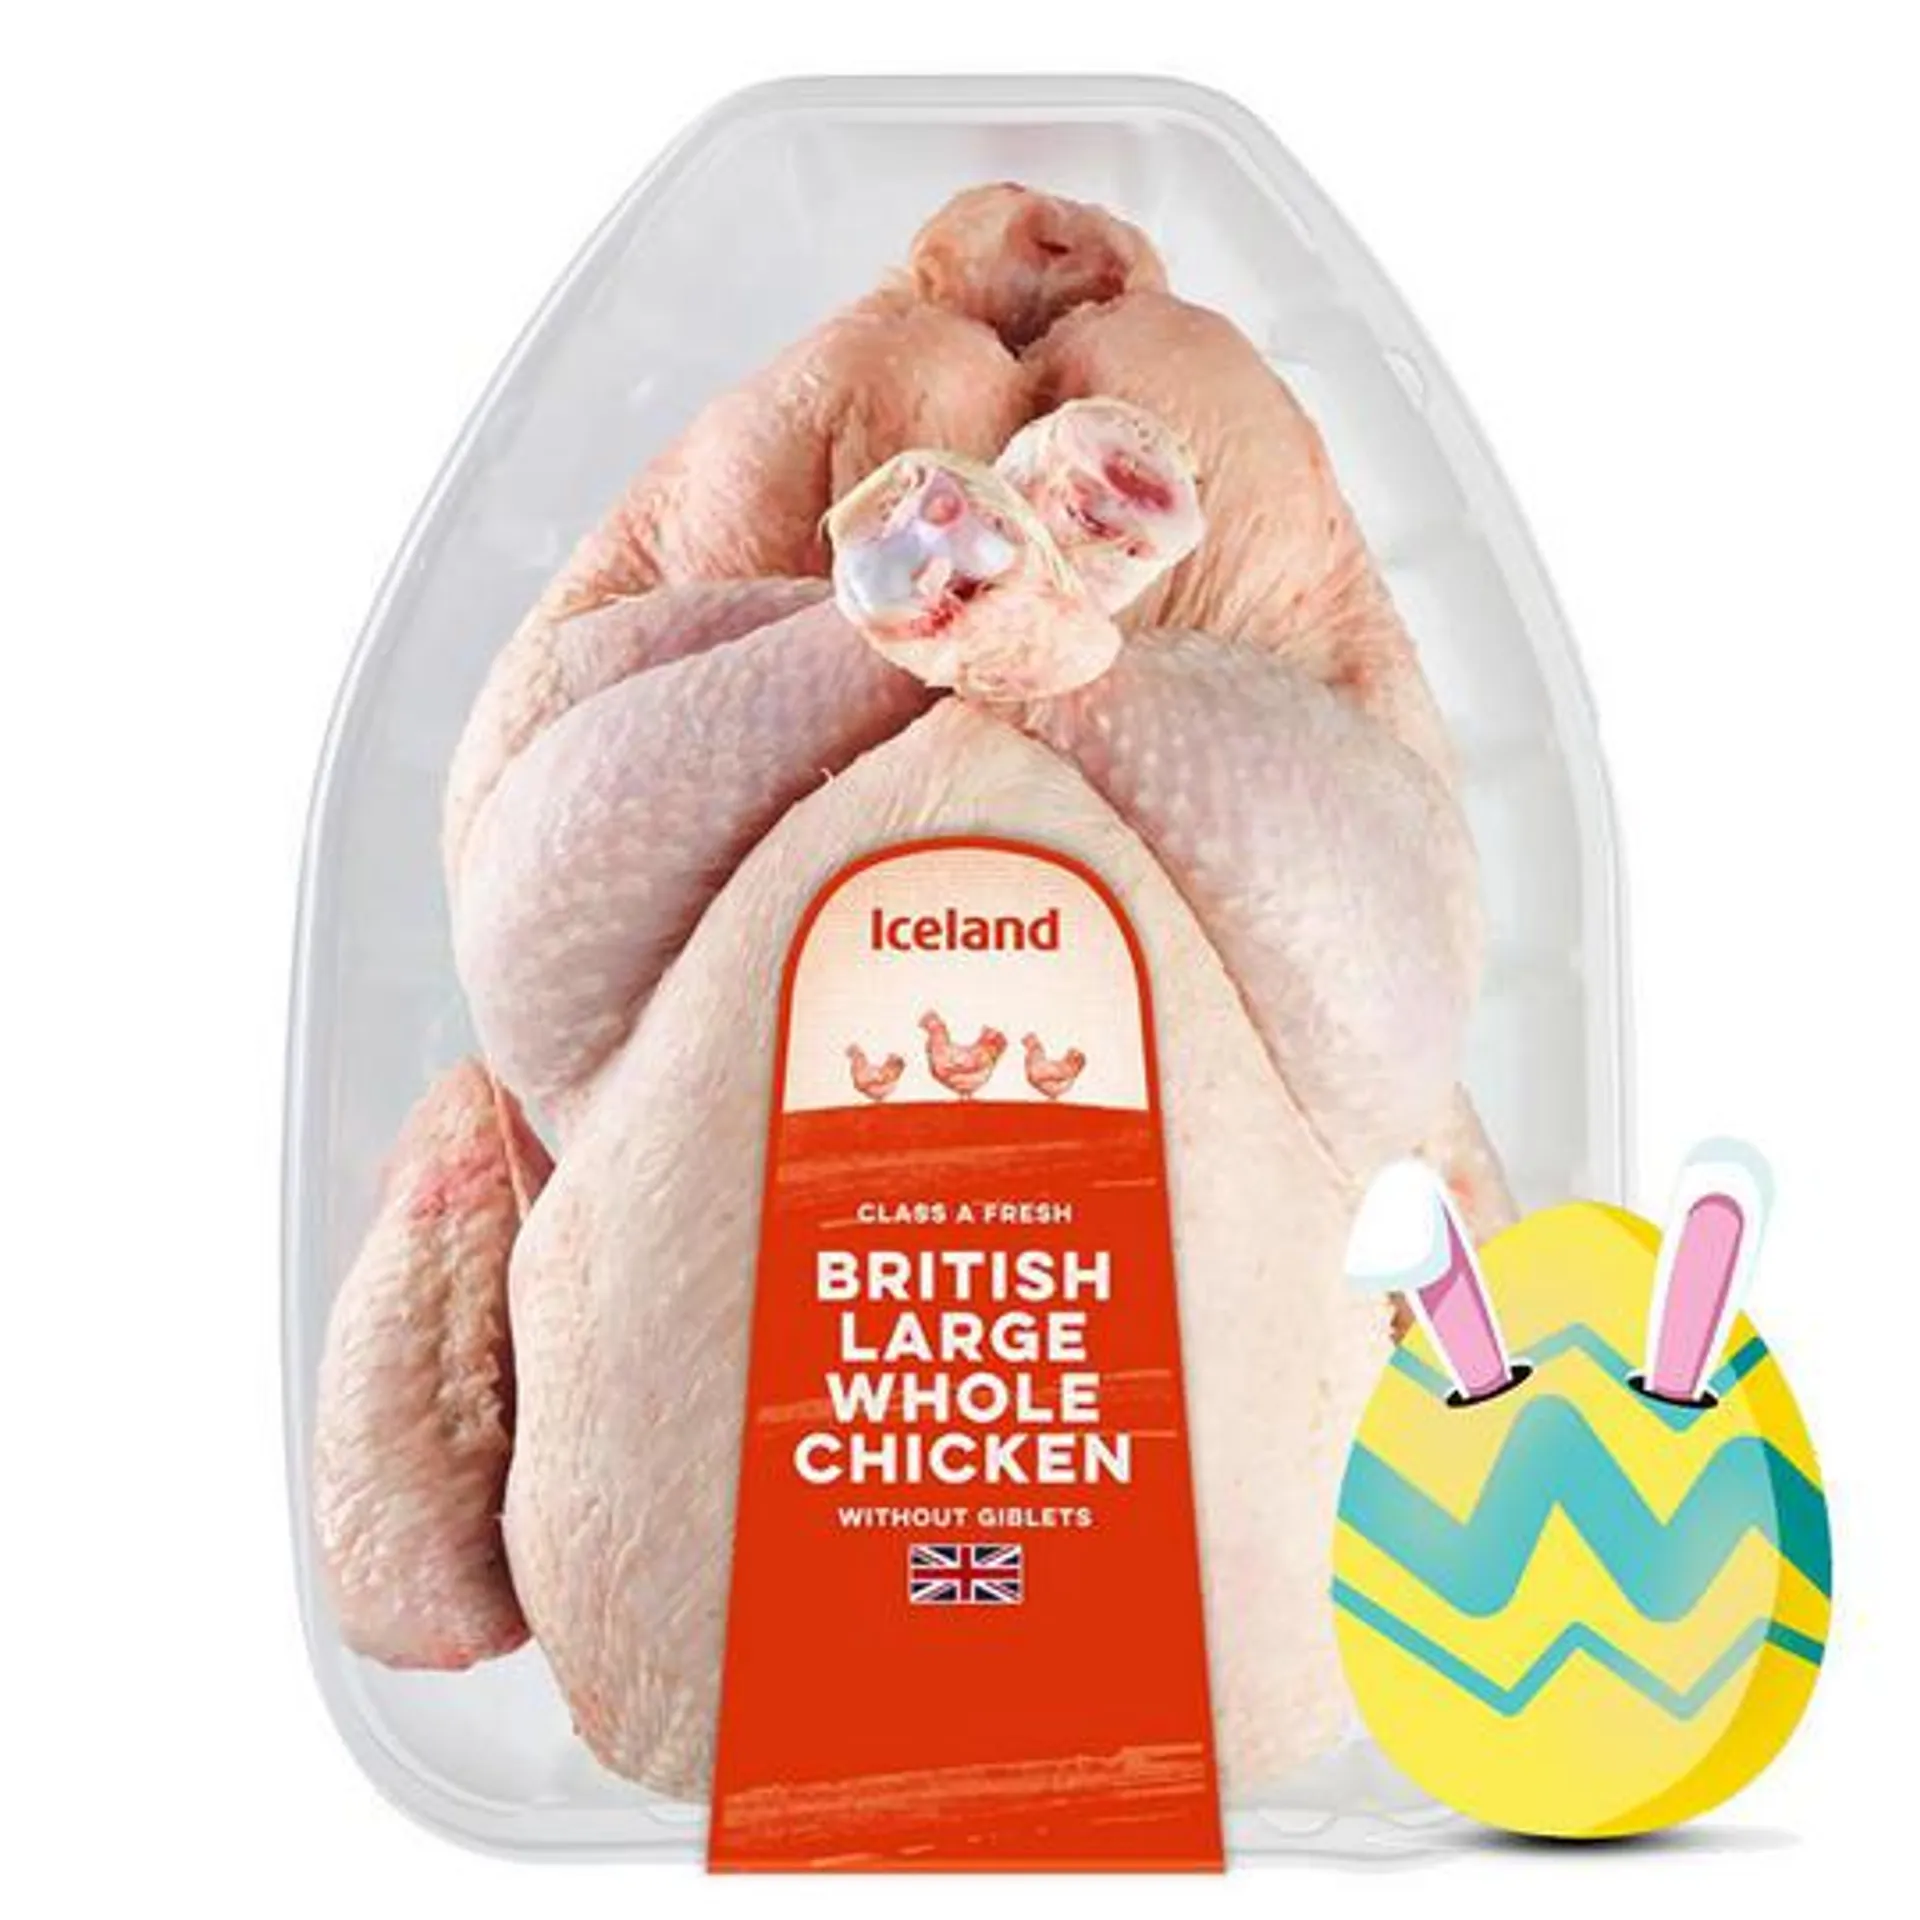 Iceland Class A Fresh British Large Whole Chicken without Giblets 1.7kg - 2.2kg